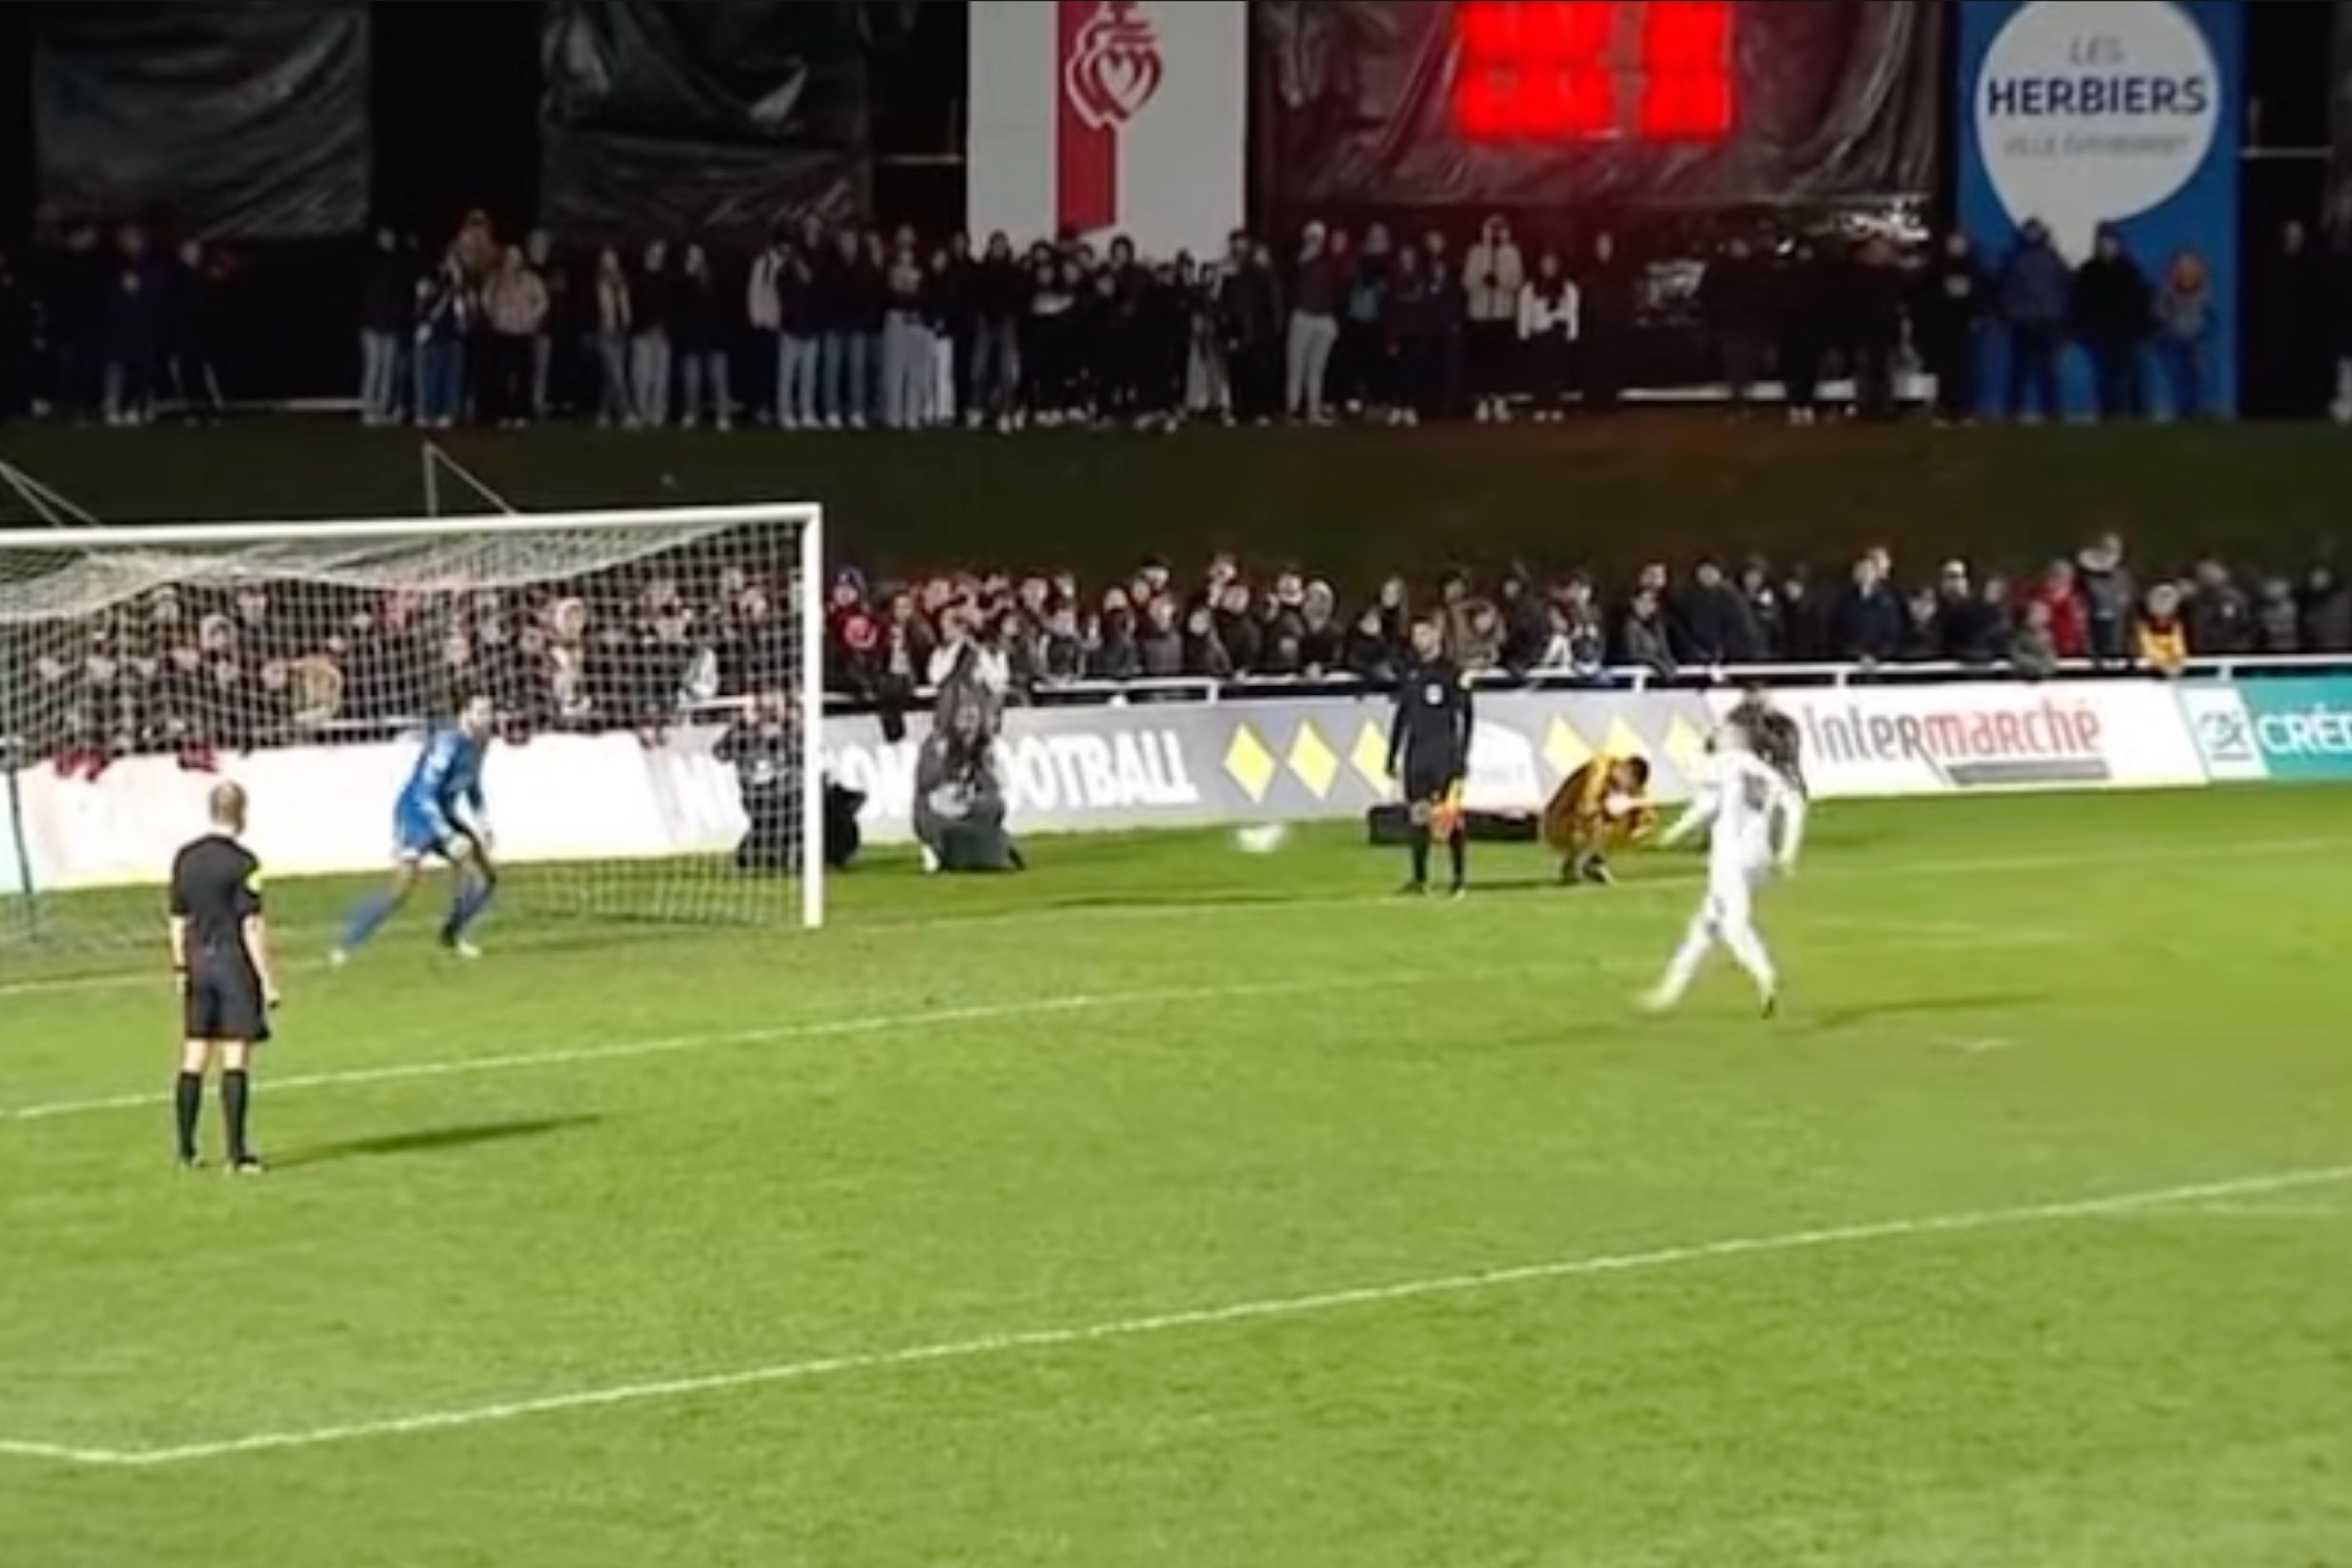 Antoine Mille takes a penalty in a Coupe de France match between Chateauroux and Les Herbiers.